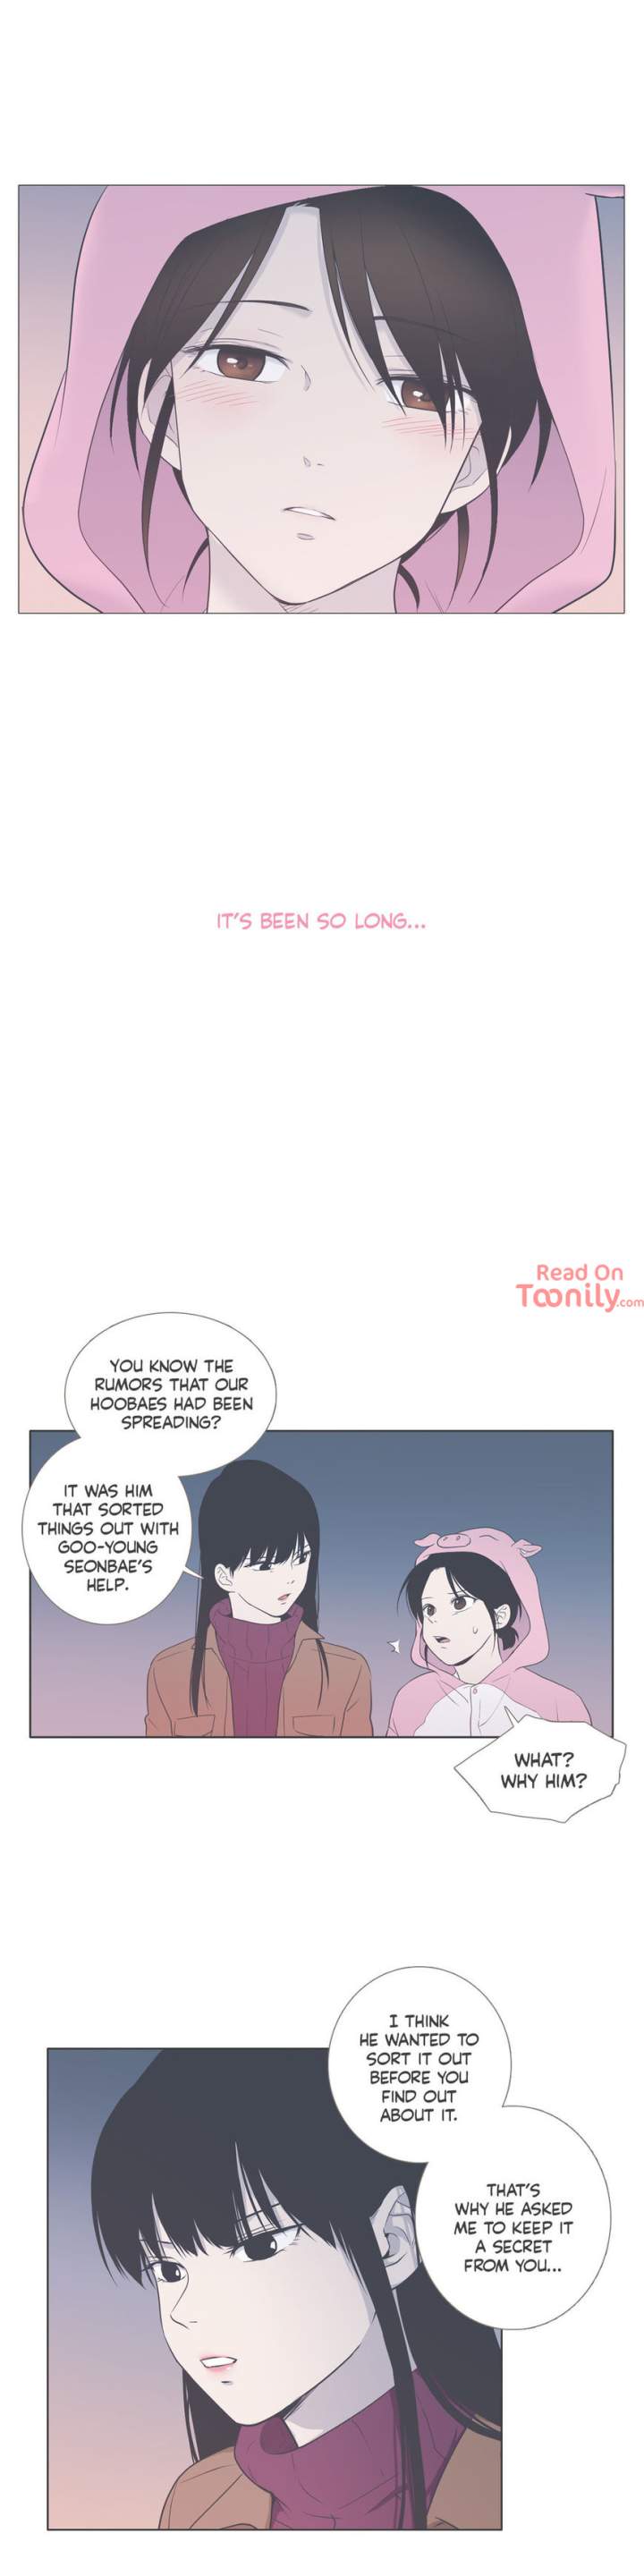 Something About Us - Chapter 60 Page 6